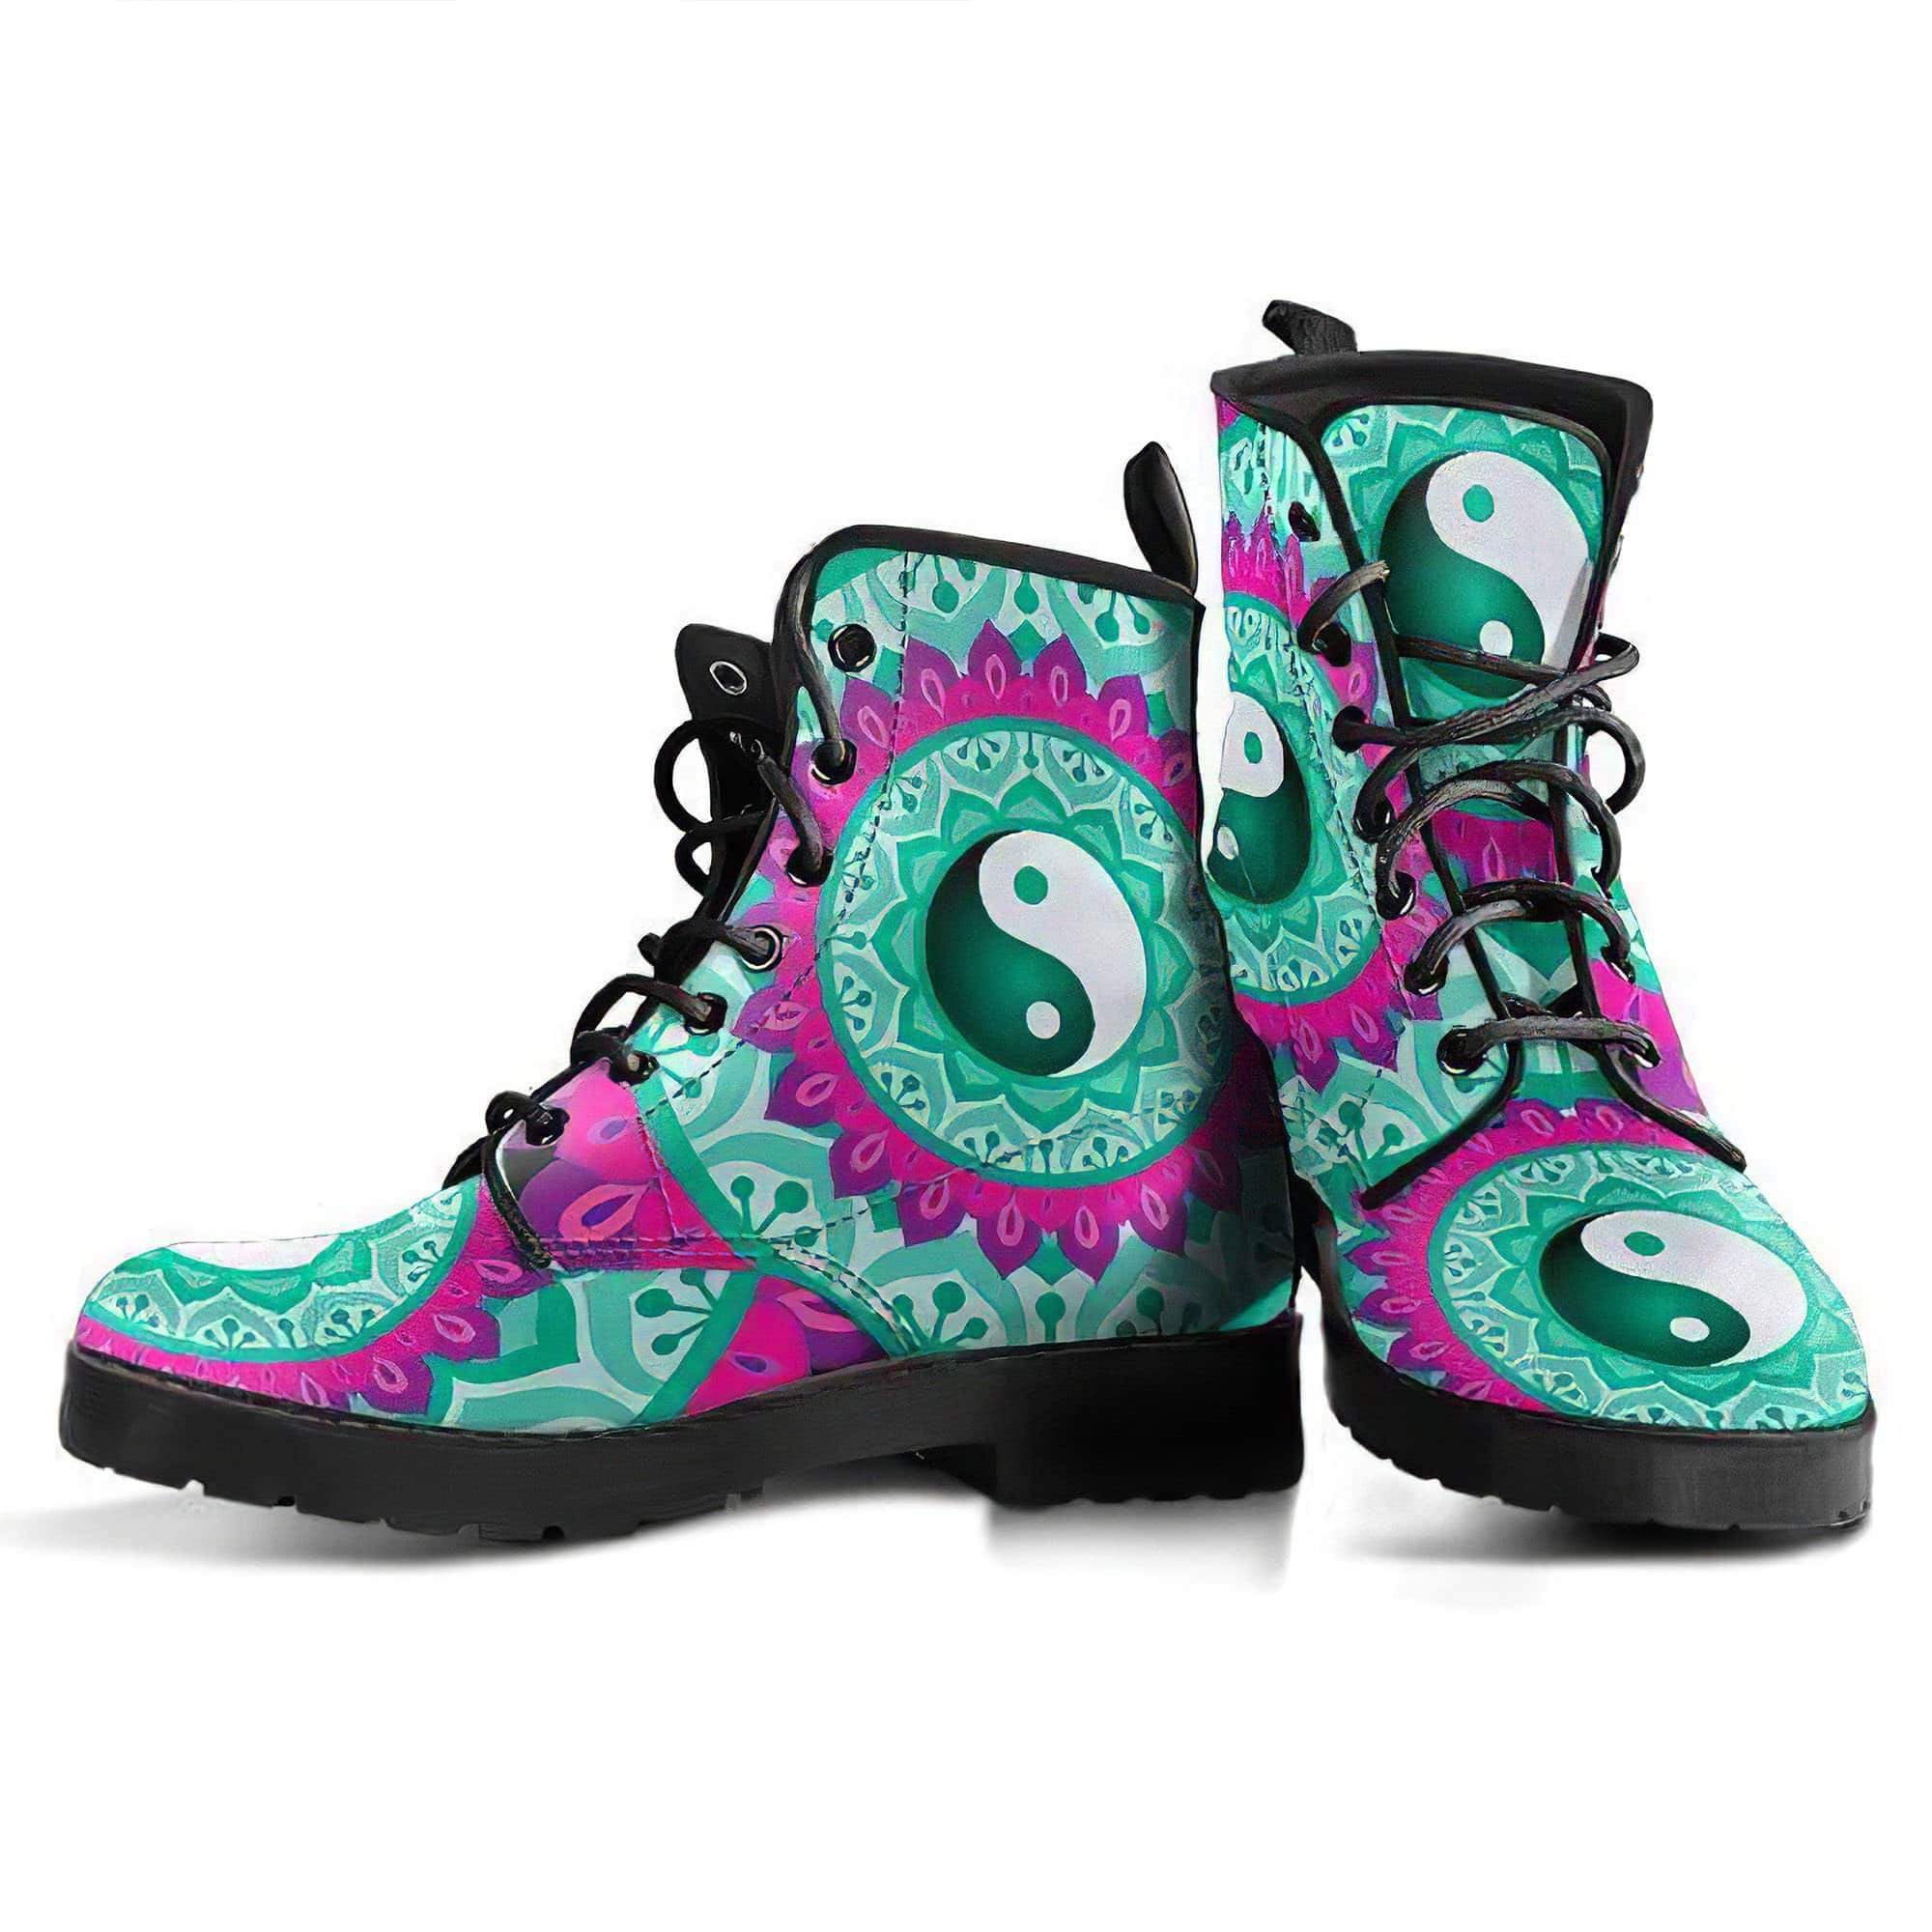 yinyang-mandala-1-handcrafted-boots-women-s-leather-boots-12051981369405.jpg